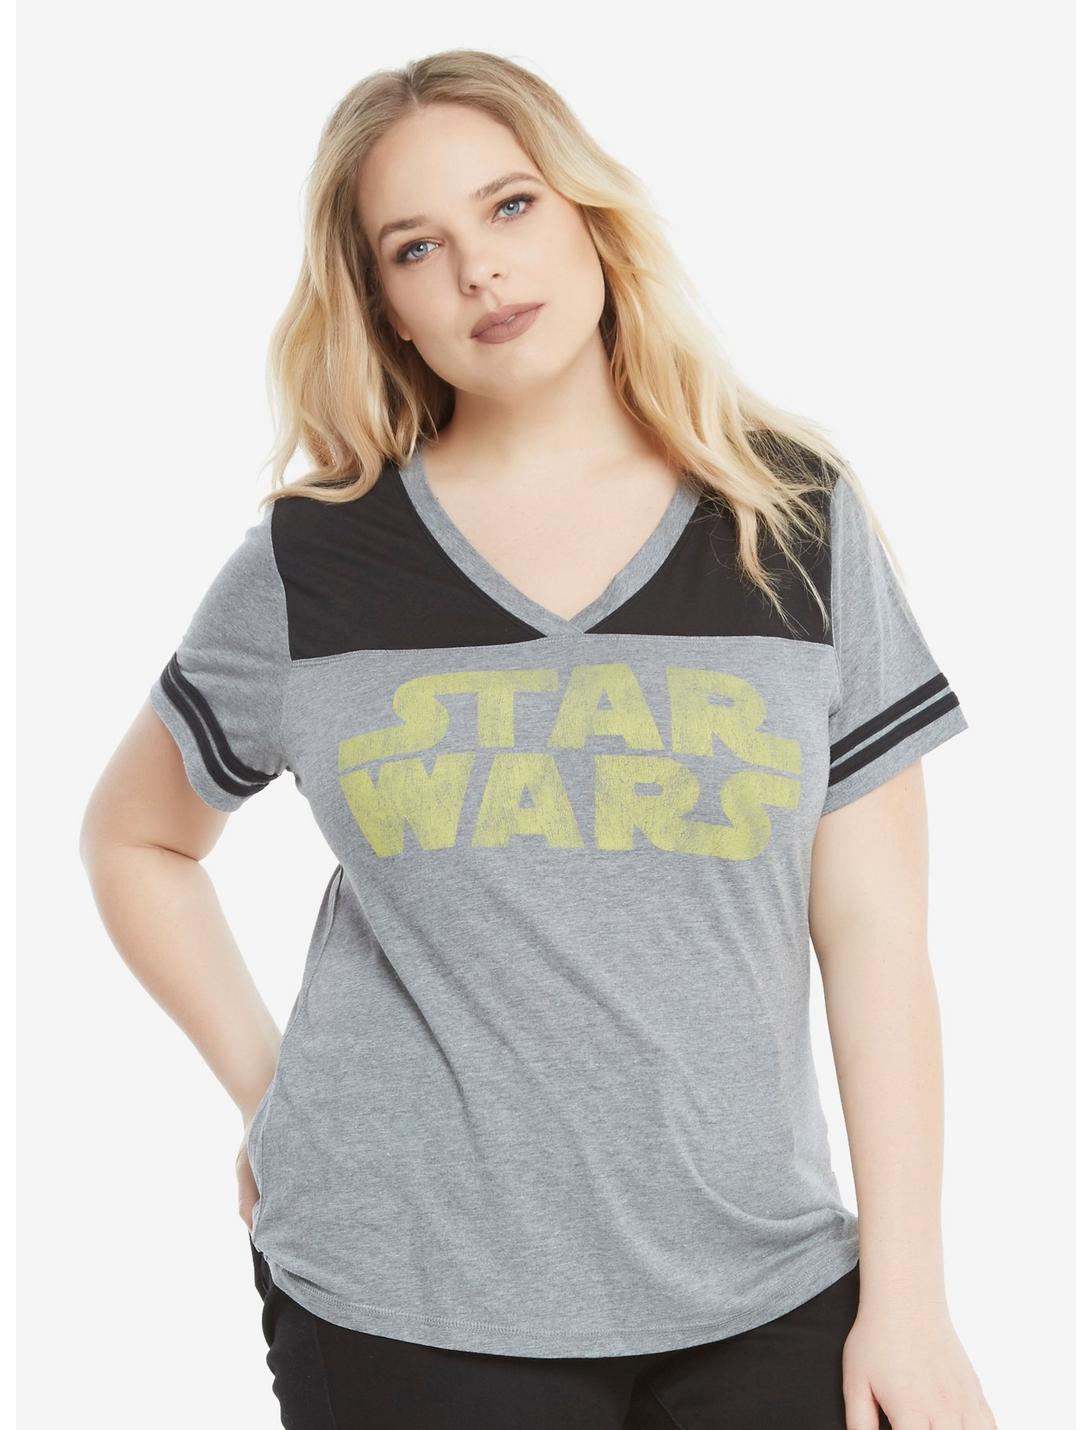 Star Wars 77 Logo Athletic T-Shirt Extended Size, , hi-res